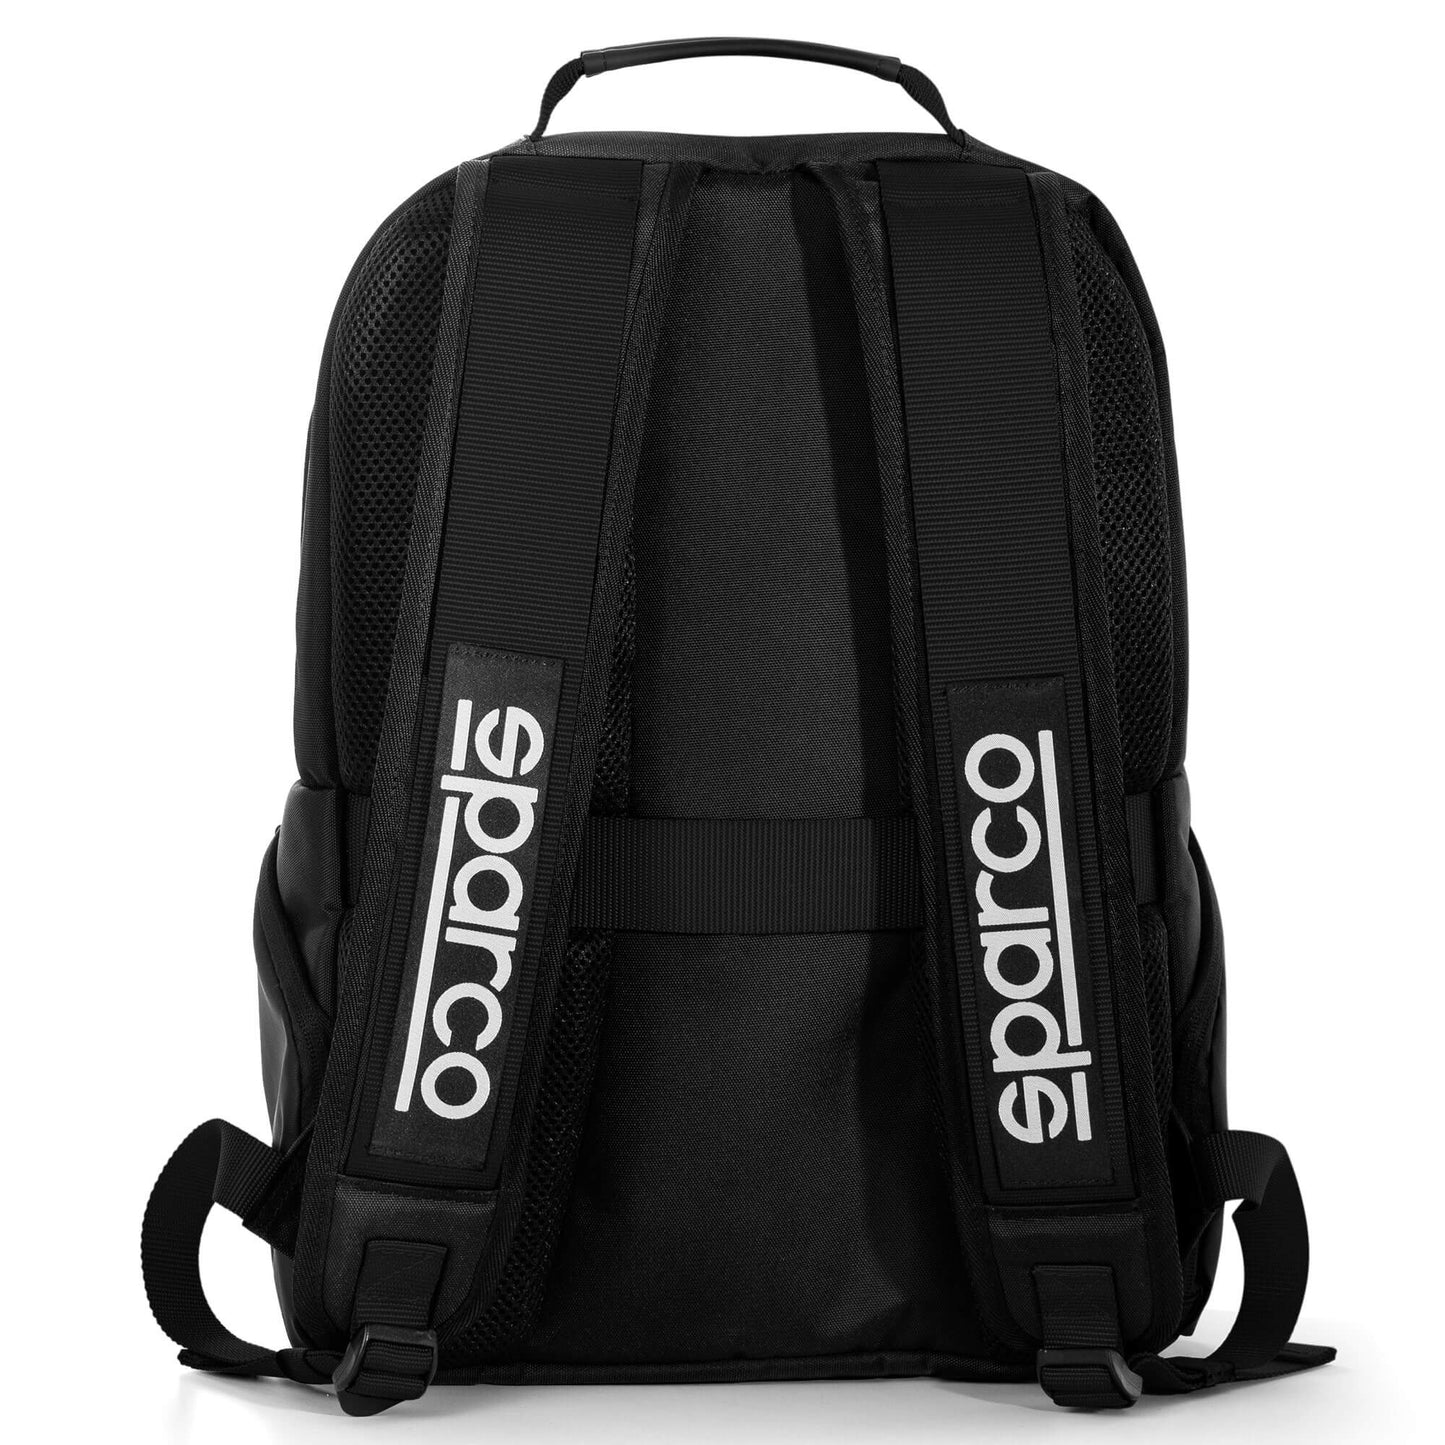 Sac à dos Sparco Stage - 016440